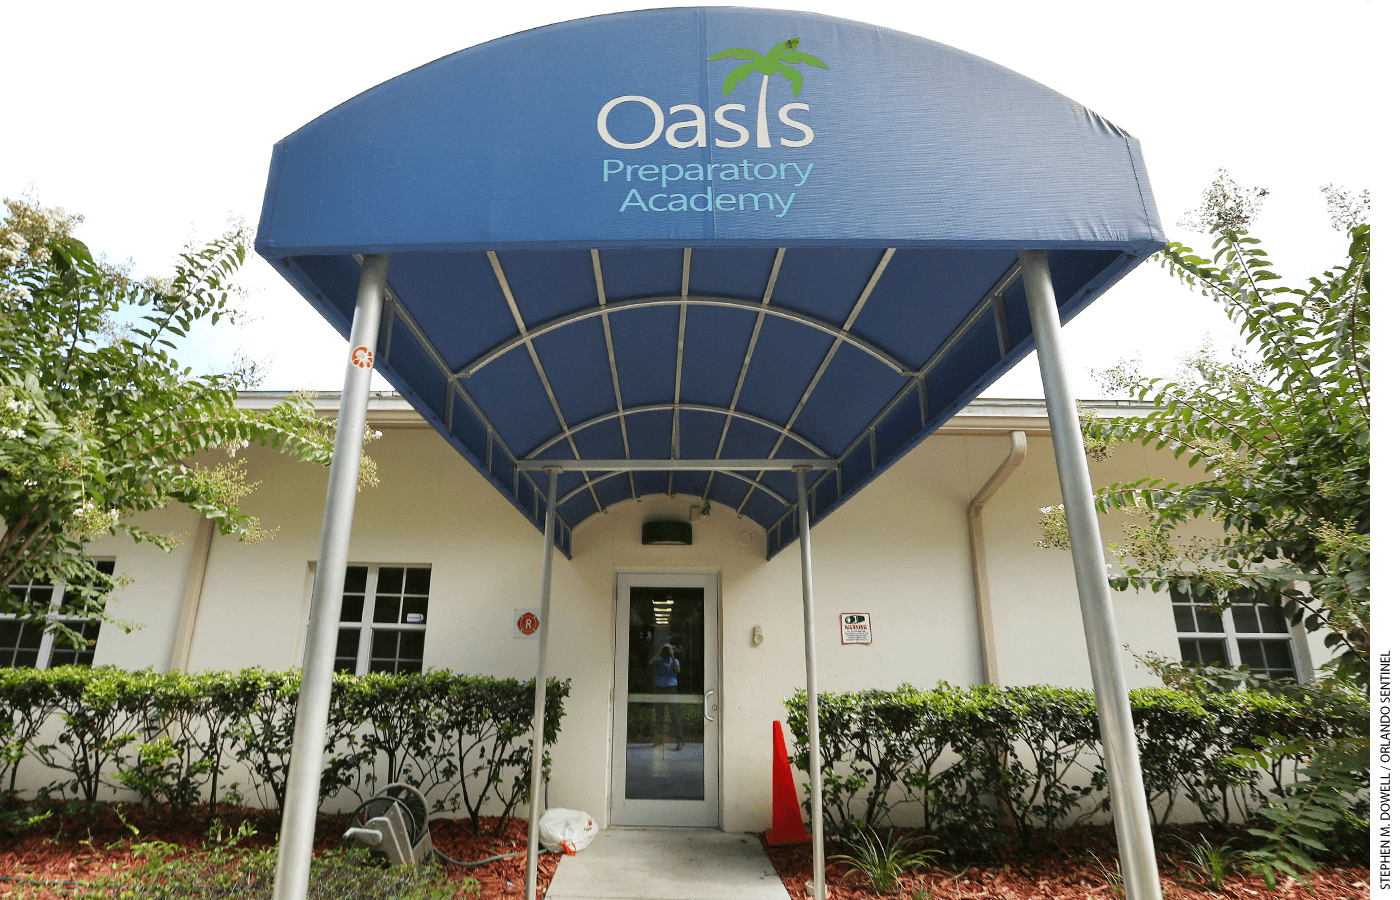 Oasis Preparatory Academy, a charter school in Orange County, Florida, was forced to close.